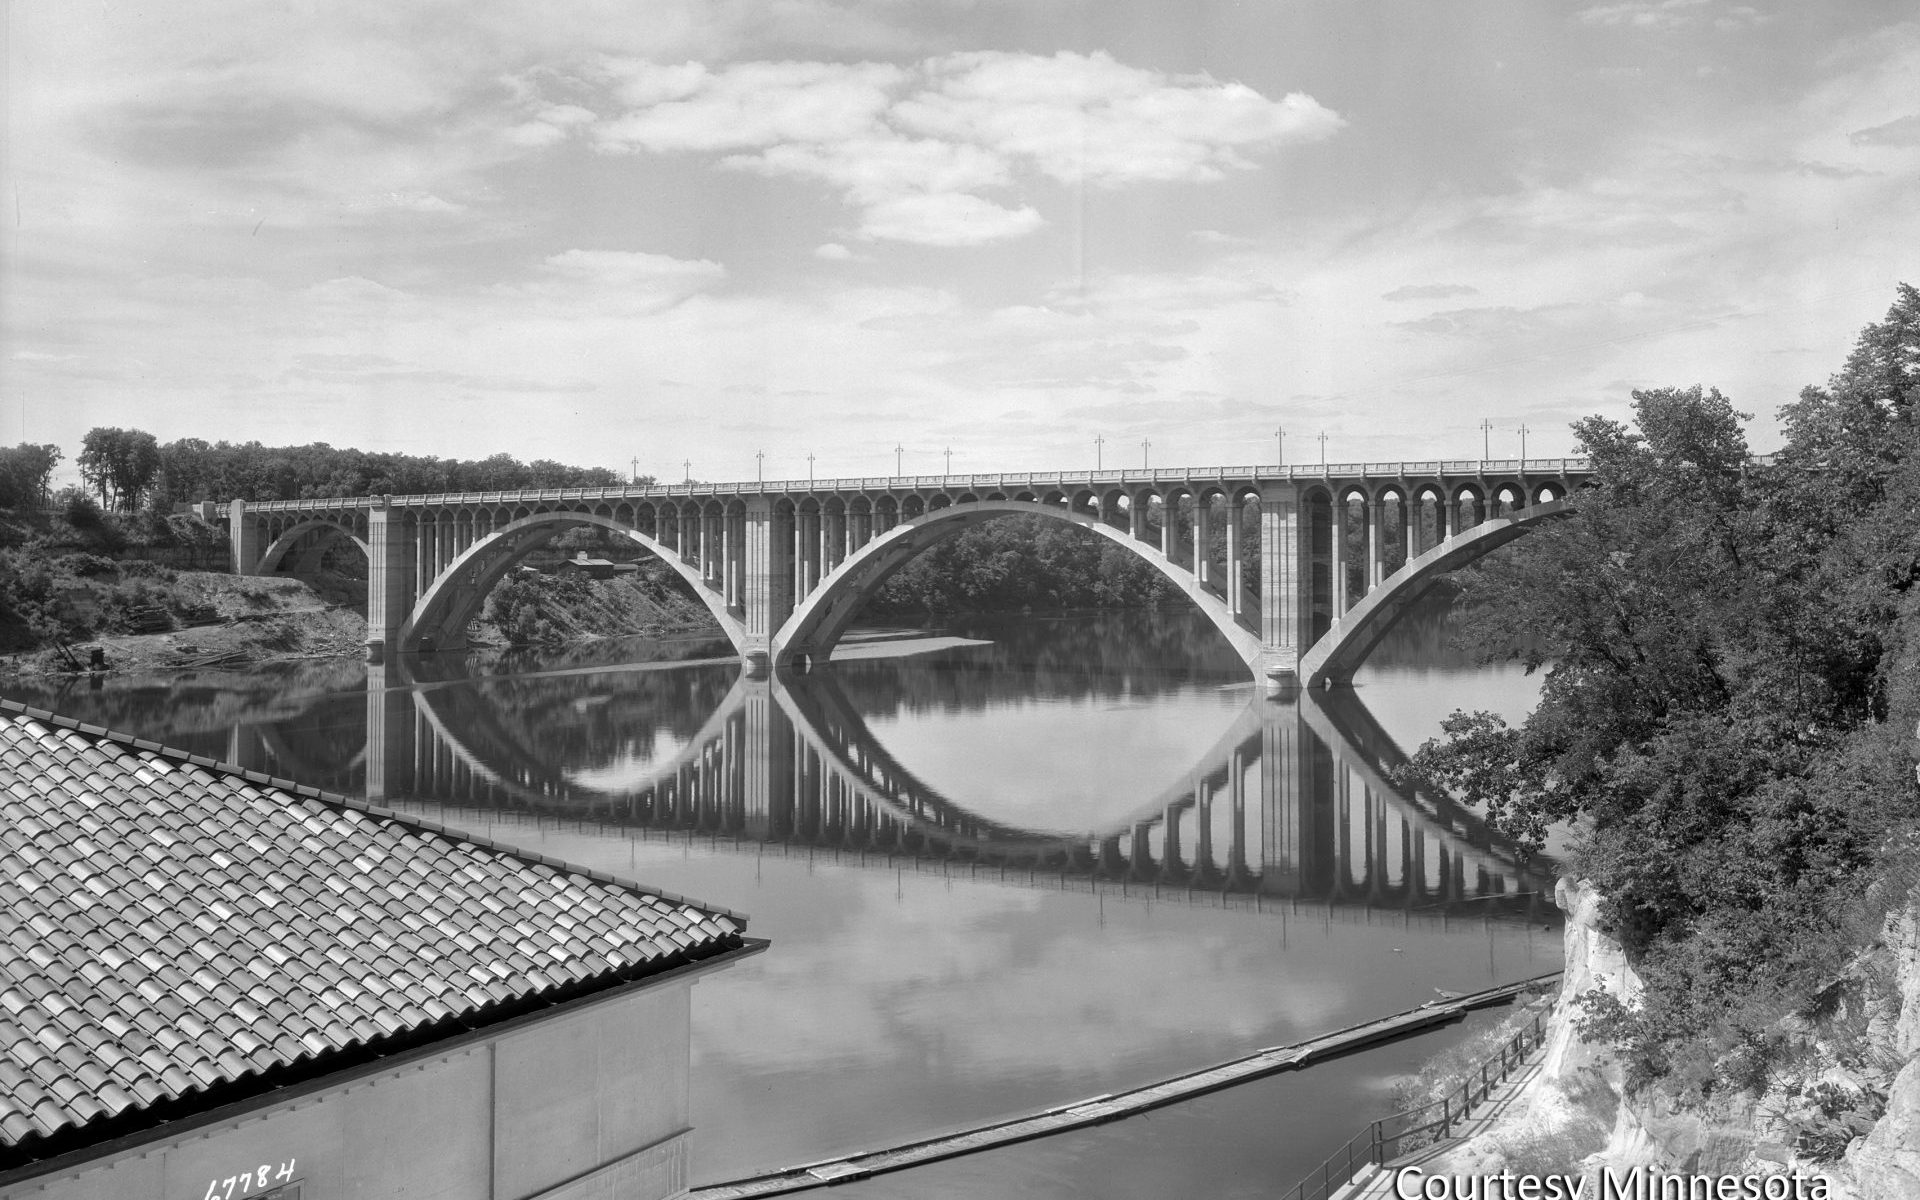 The Intercity Bridge, better known as the Ford Bridge, was completed in 1927, connecting the growing Longfellow neighborhood of Minneapolis to the area around the new Ford plant. Courtesy Minnesota Historical Society